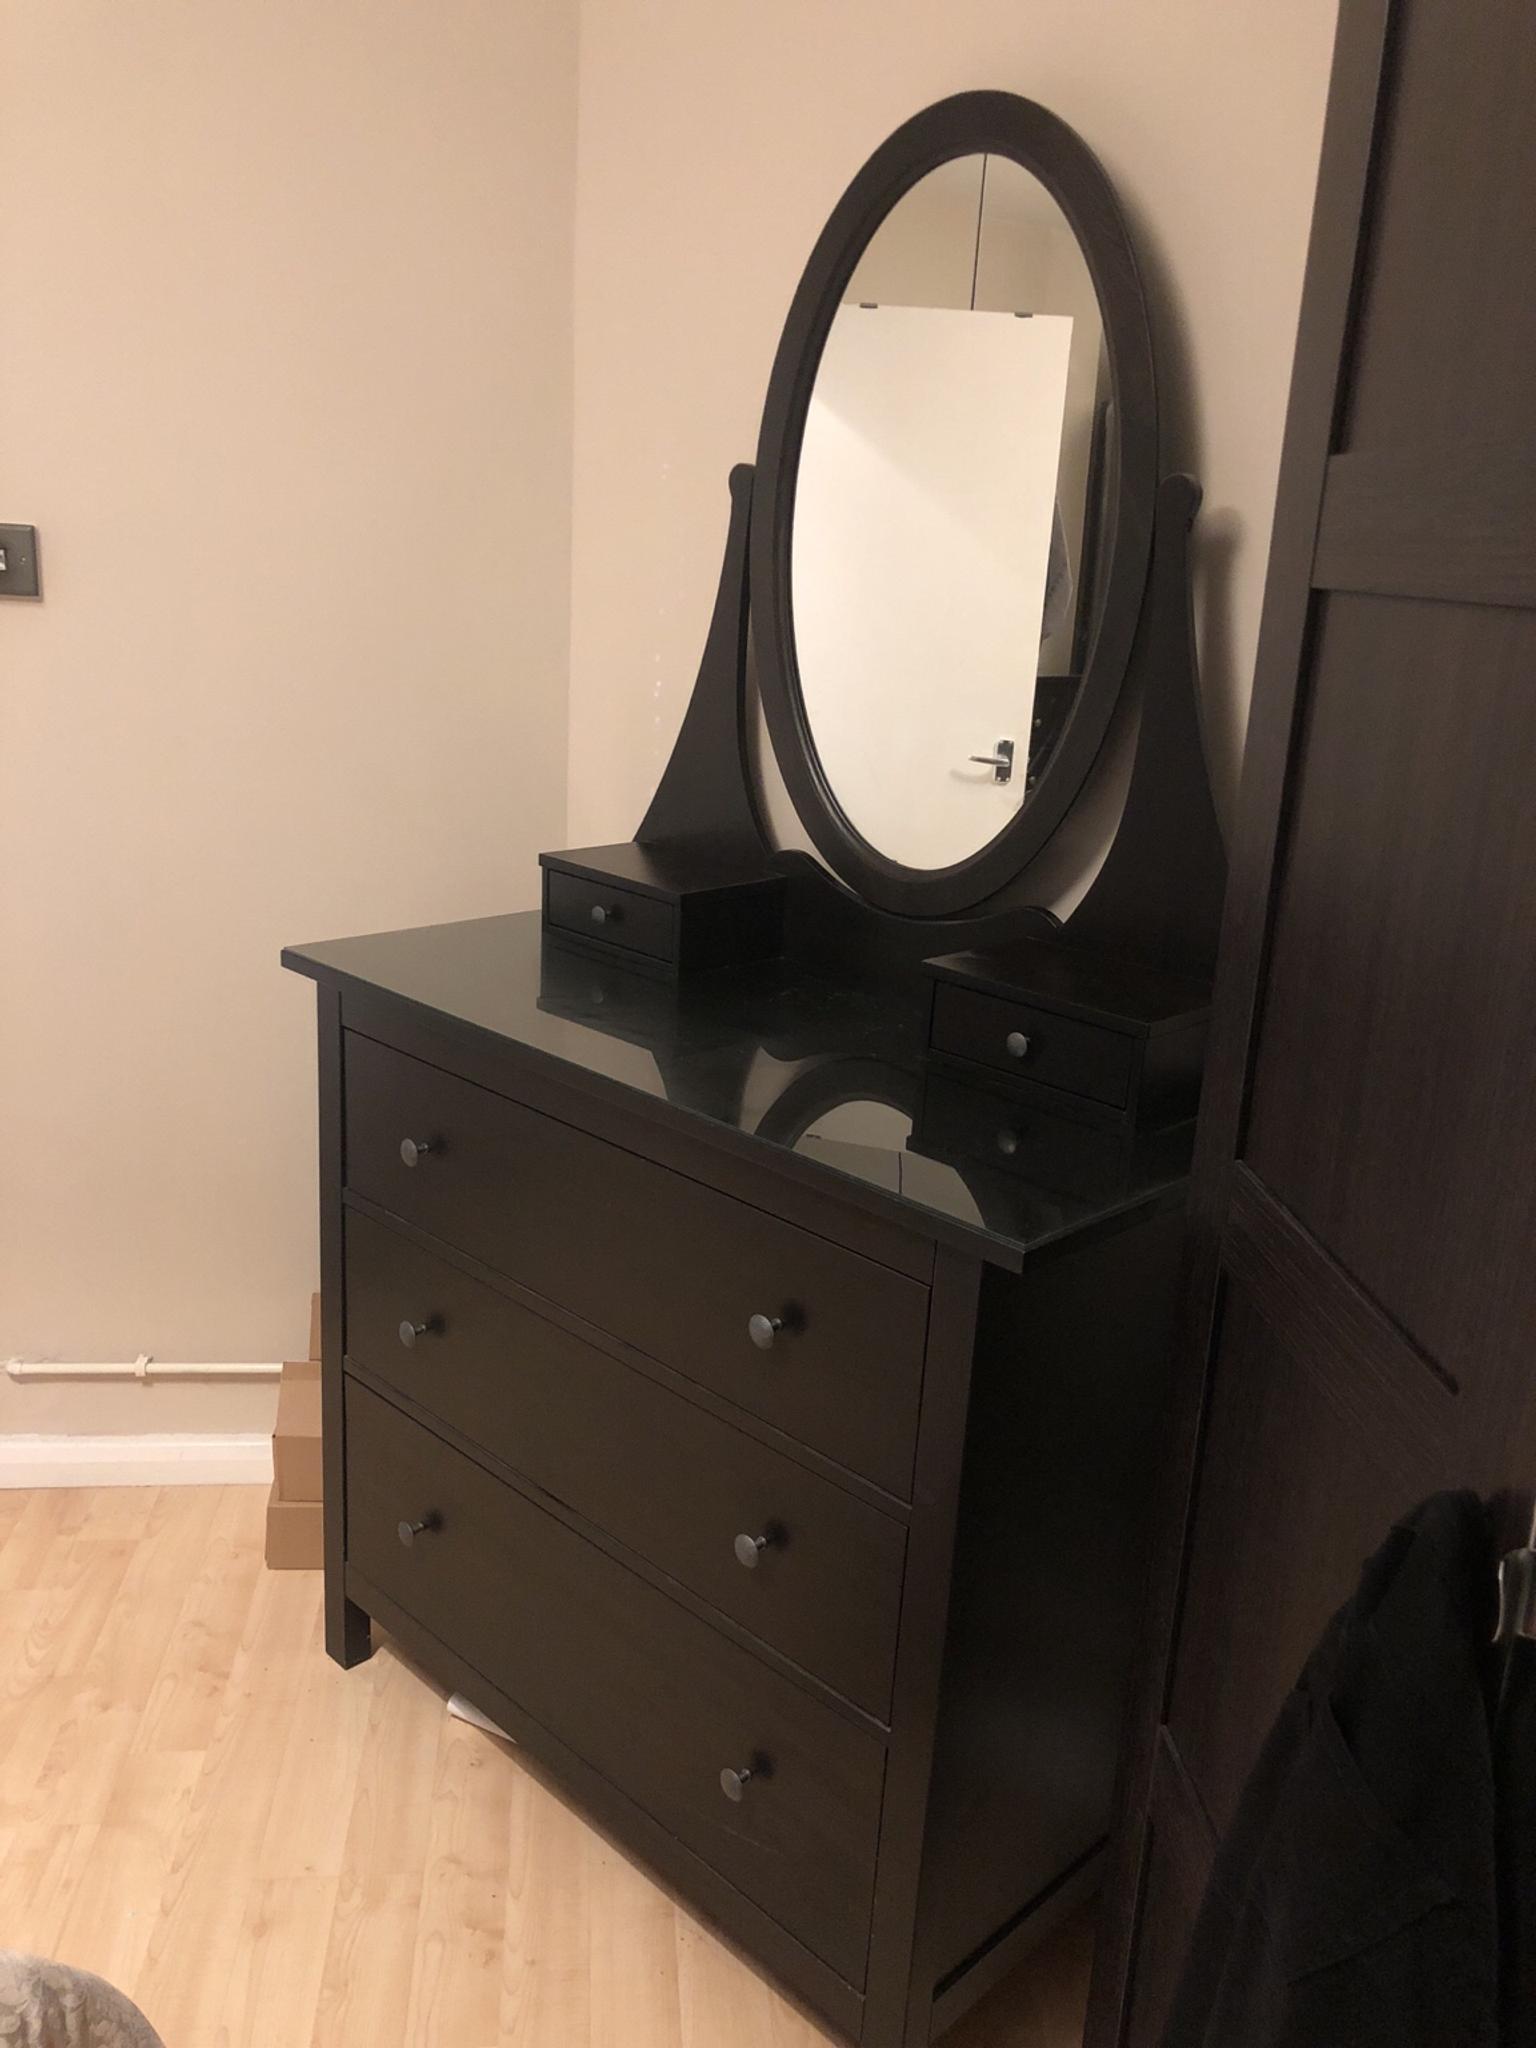 Ikea Hemnes Chest Of Drawers With Mirror In Se1 London For 120 00